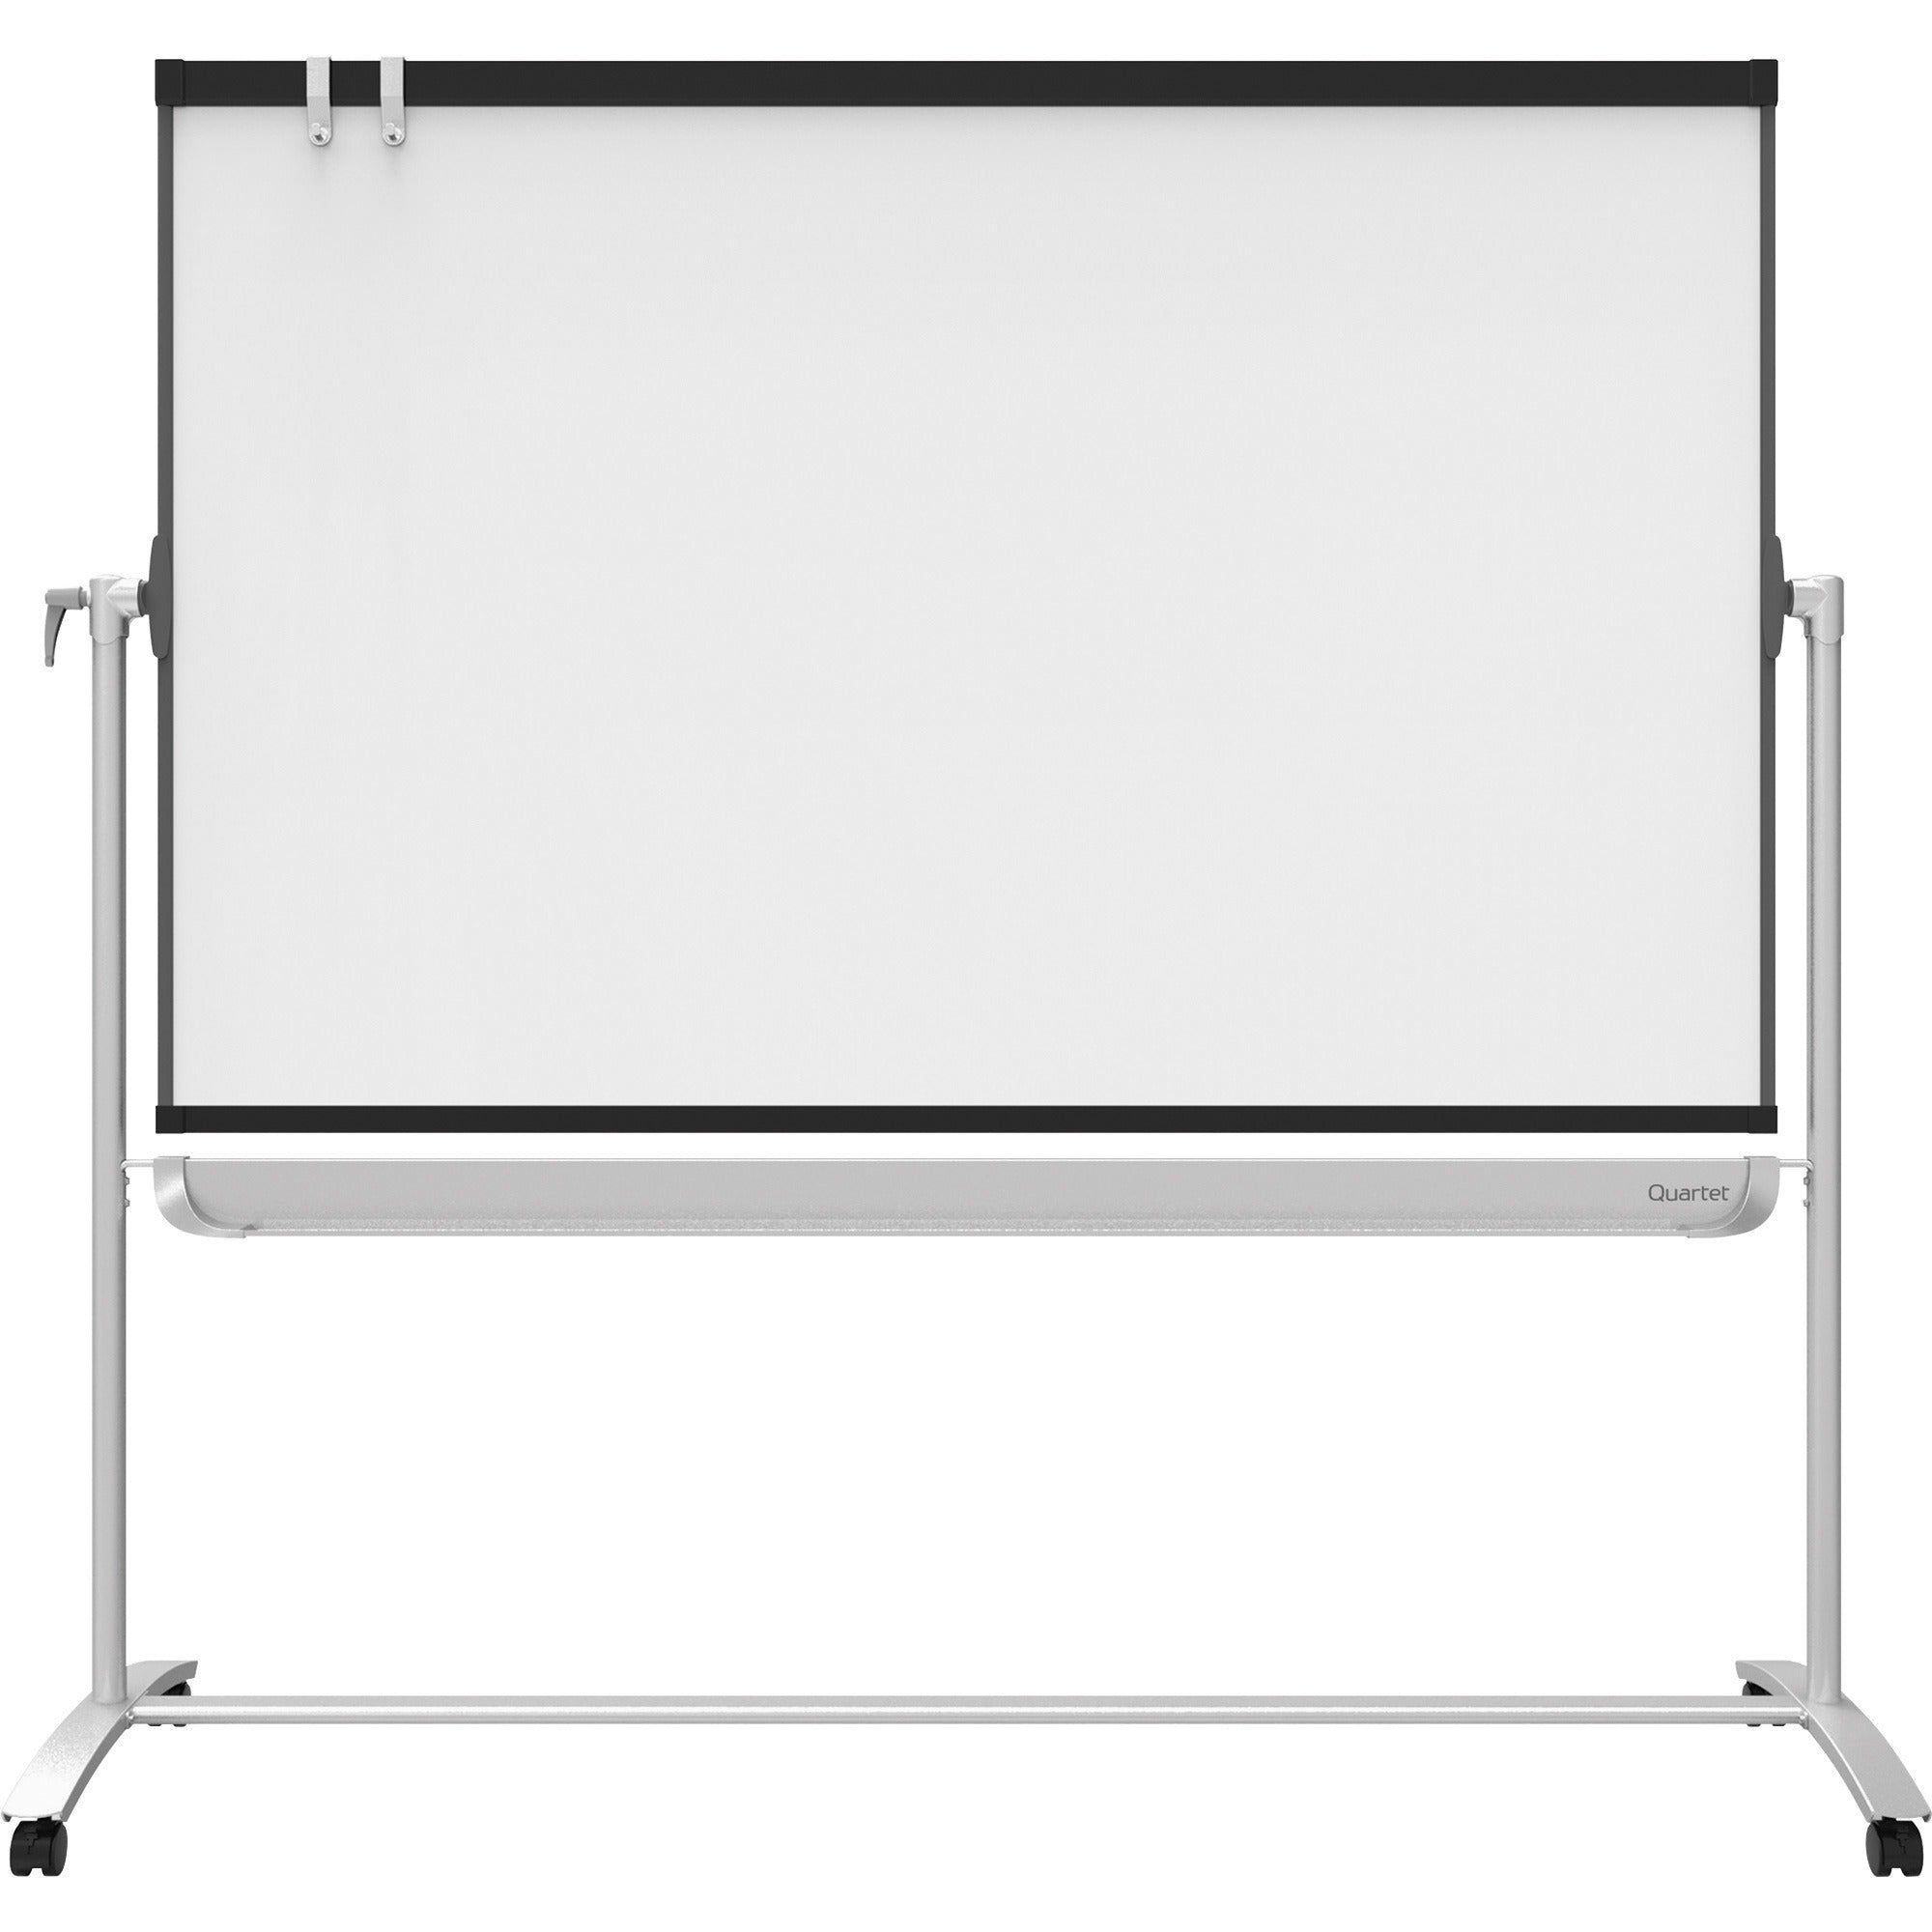 quartet-magnetic-mobile-presentation-easel-48-4-ft-width-x-36-3-ft-height-white-painted-steel-surface-graphite-frame-magnetic-assembly-required-1-each_qrtecm43p2 - 1